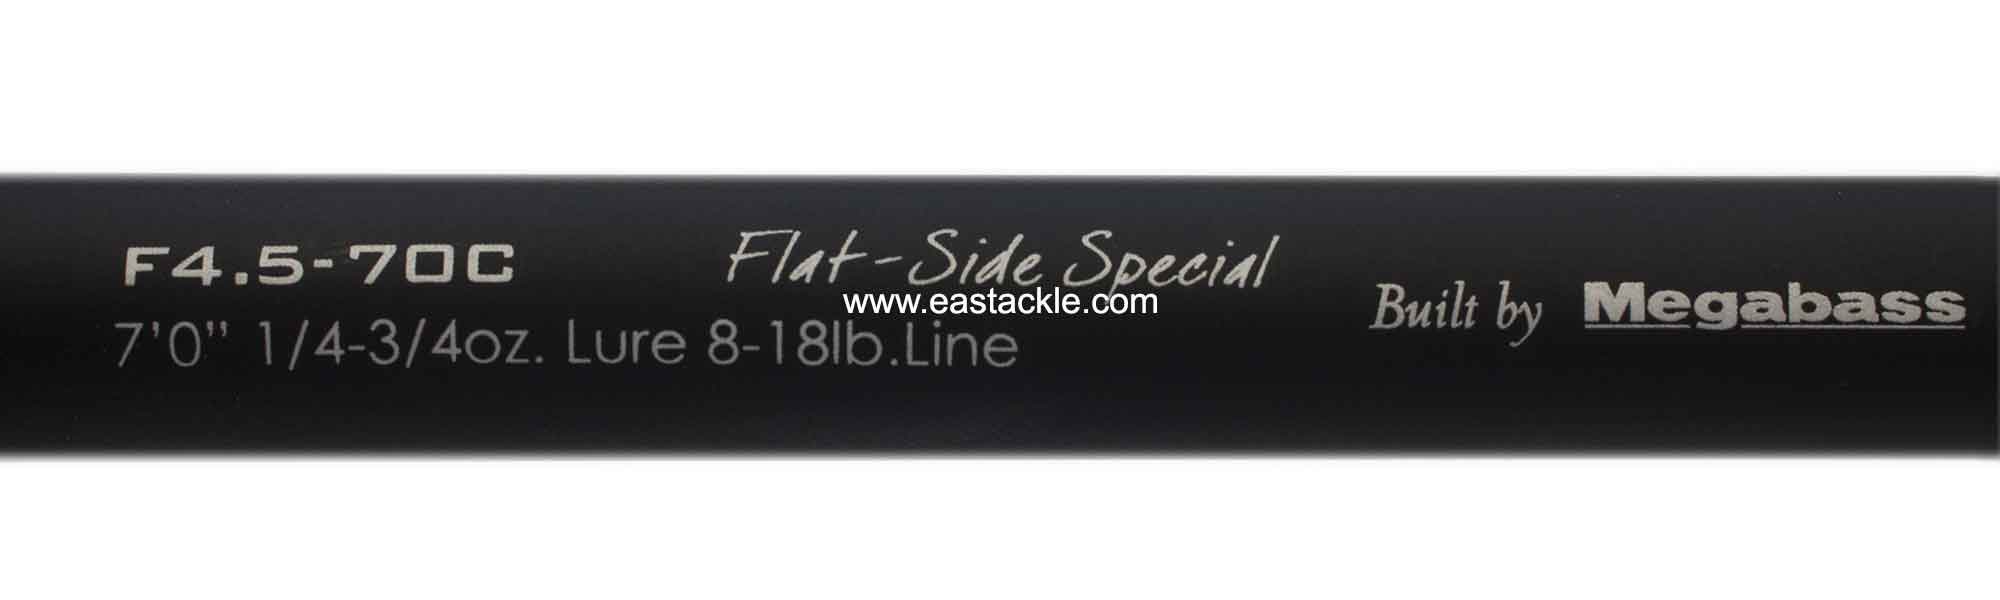 Megabass - Levante - F4.5-70C - FLAT SIDE SPECIAL - Bait Casting Rod - Blank Specifications